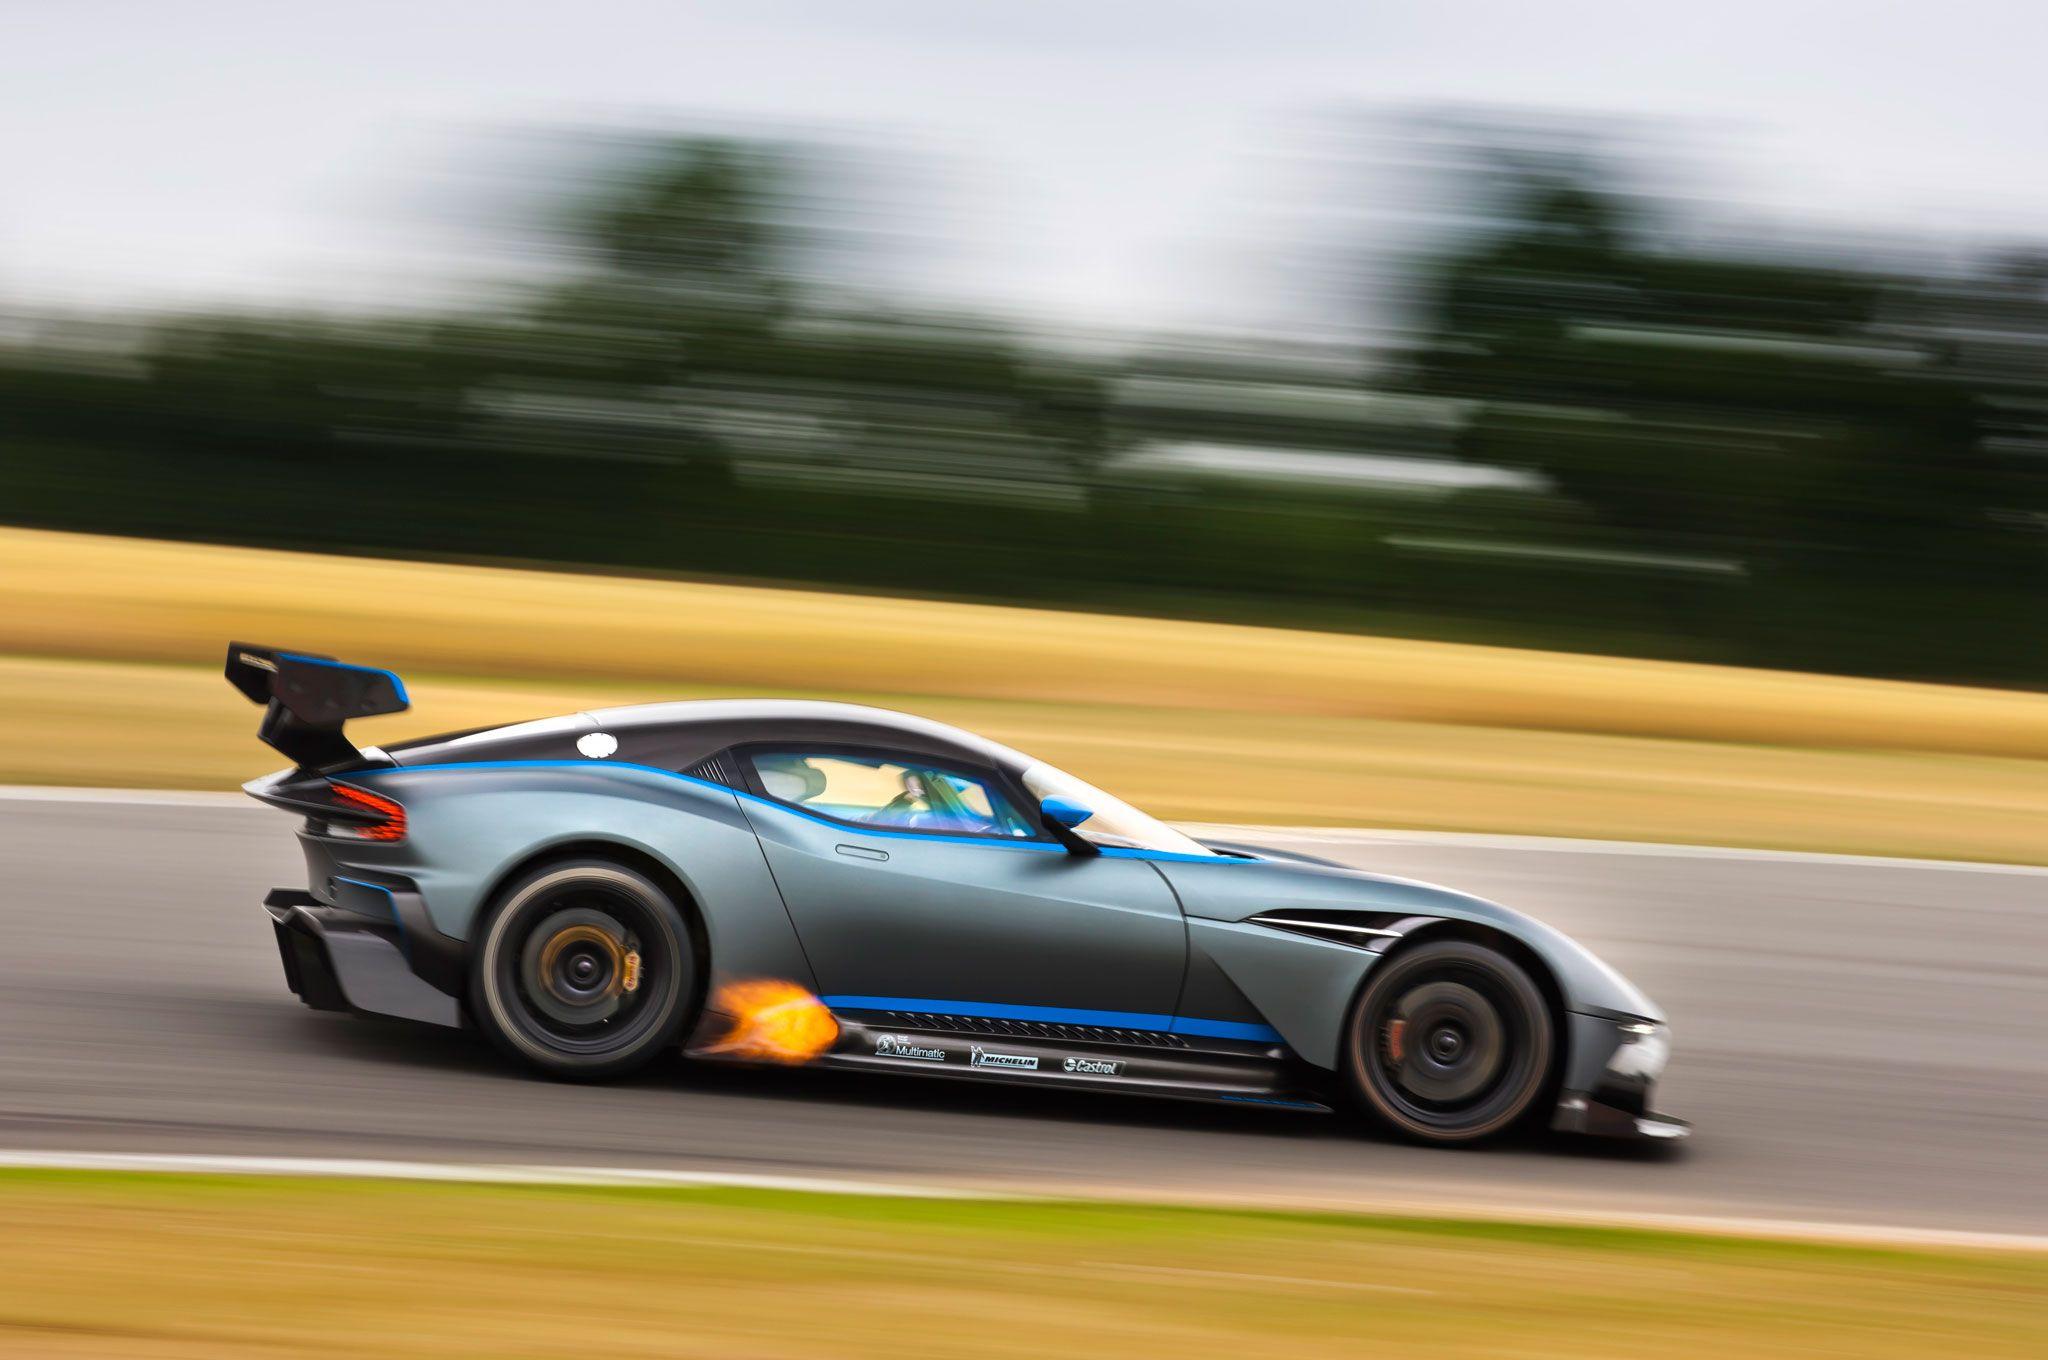 Engineering Firm To Make Road Legal Versions Of Aston Martin